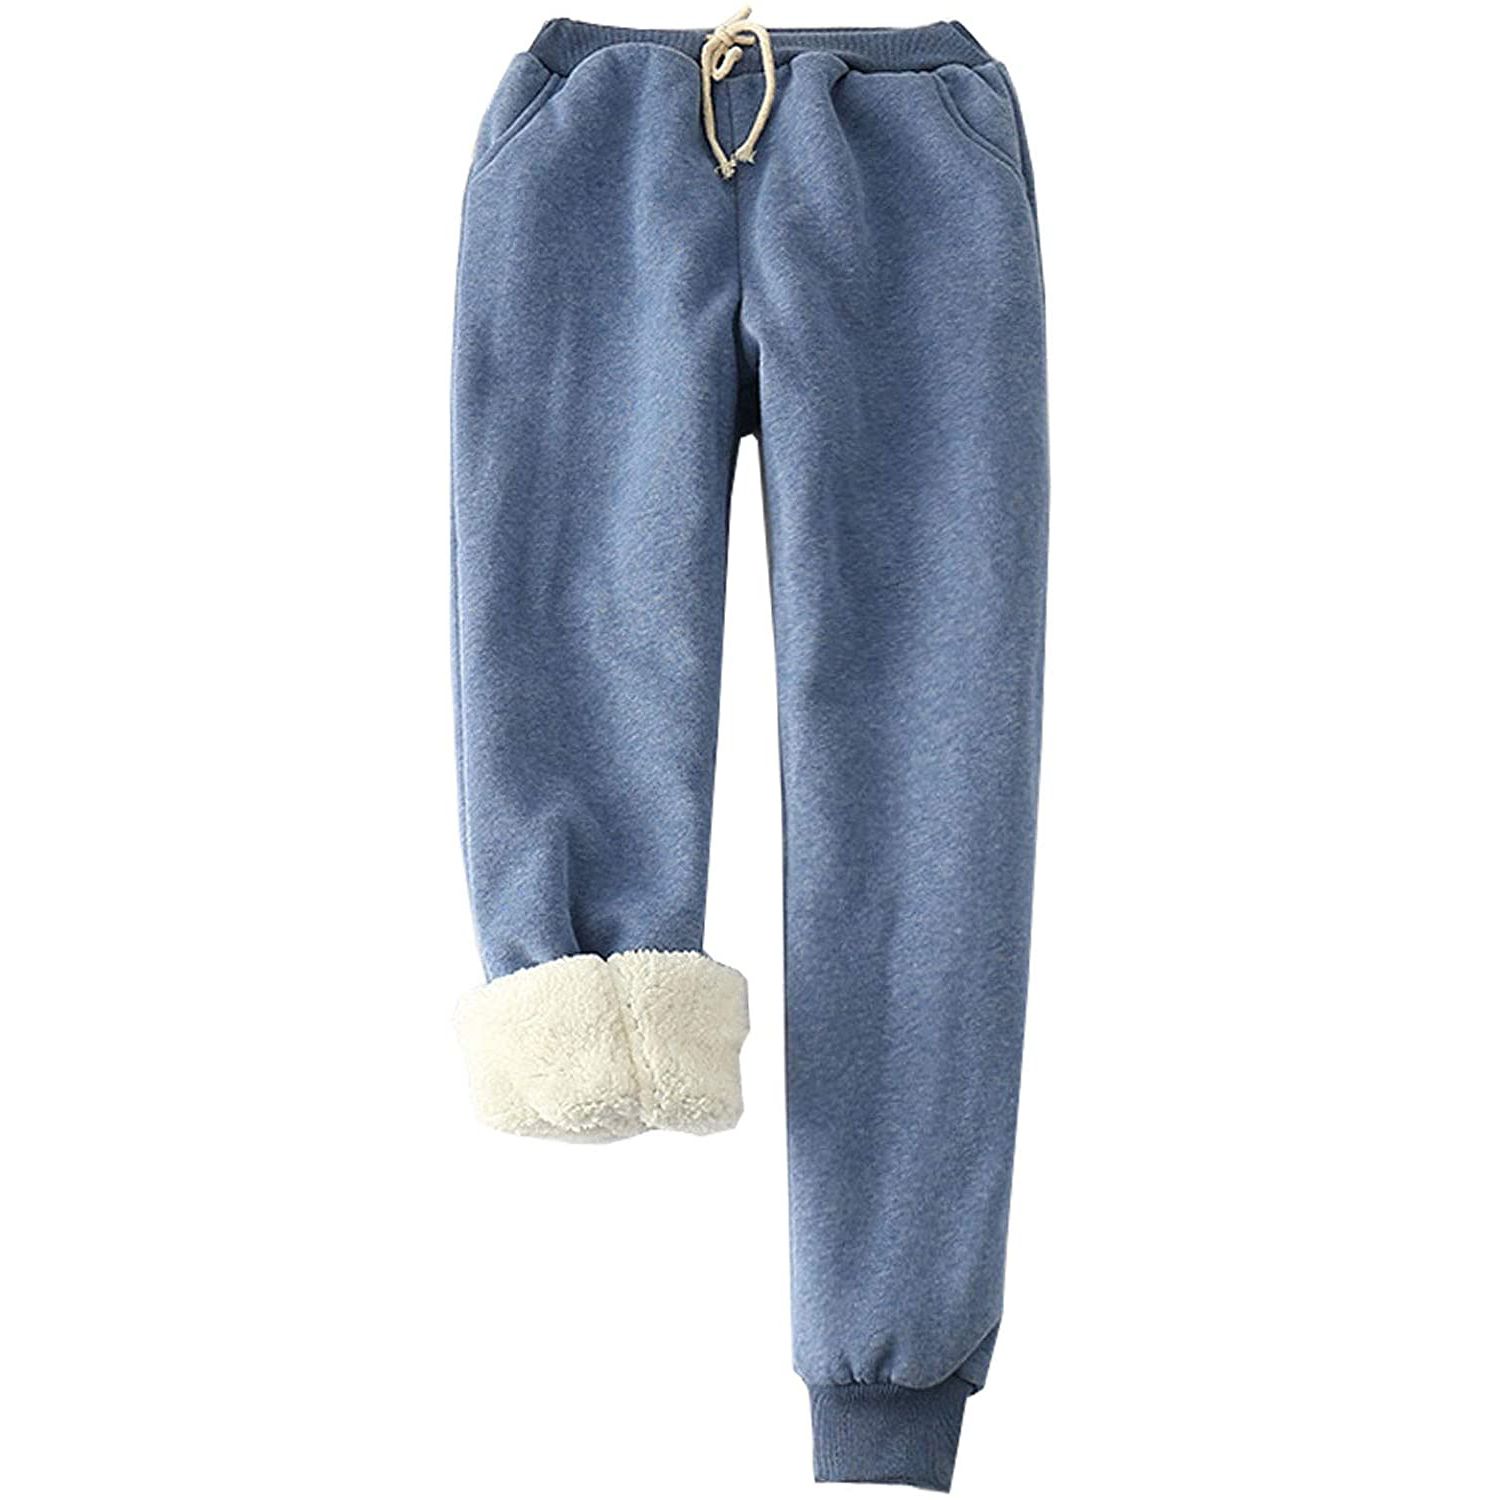 Shop These Customer-Loved Fleece-Lined Joggers from Amazon | PEOPLE.com